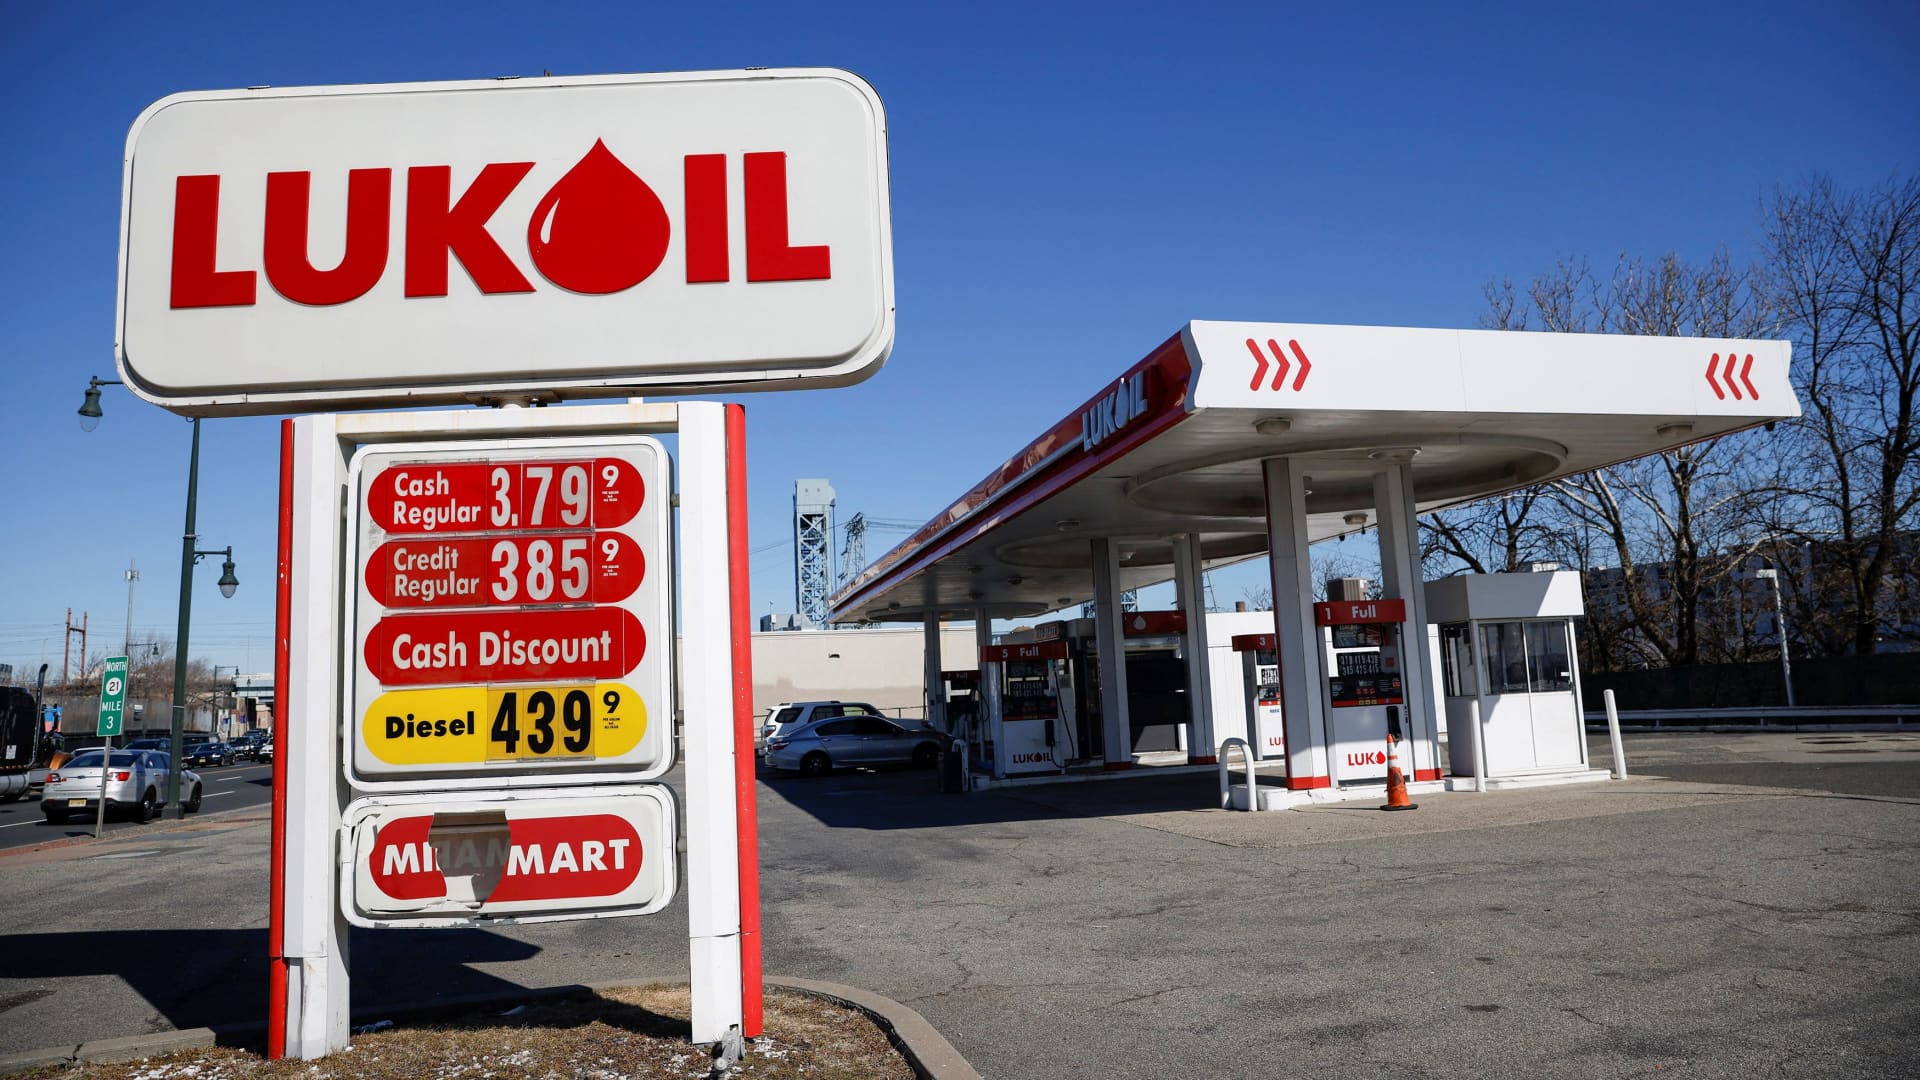 The city council of Newark, New Jersey, unanimously passed a resolution March 3, 2022, urging the the state's largest city to suspend all licenses of two local Lukoil gasoline stations to show support for Ukraine amid the Russian invasion.